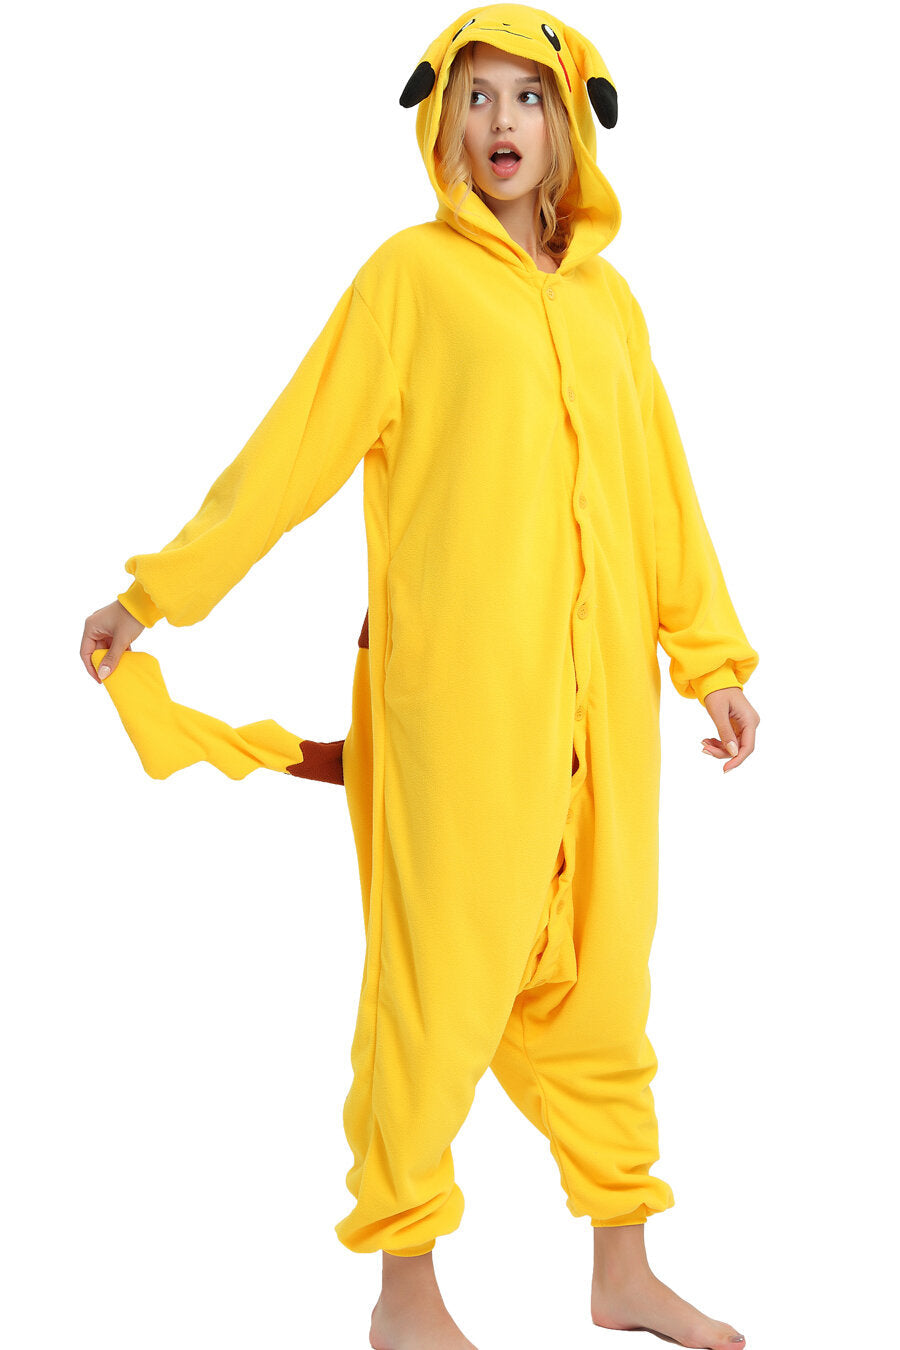 Pikachu and Snorlax Costumes